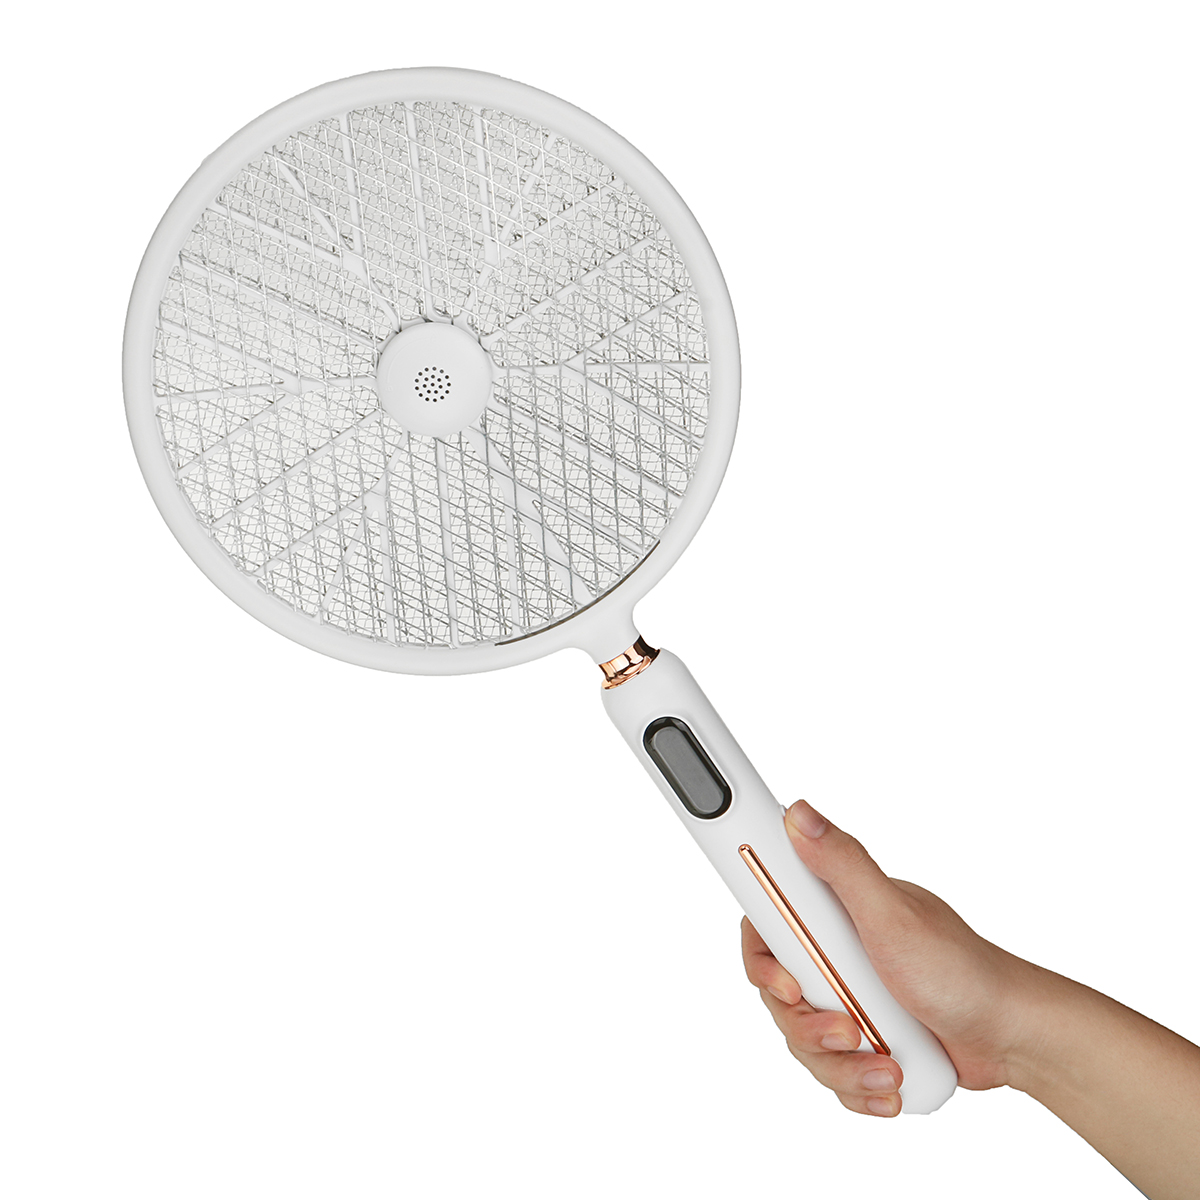 1200mAh-Mosquito-Killer-Lamp-Human-Body-Induction-Smart-Counting-Mosquito-Swatter-USB-Rechargable-LE-1937273-15